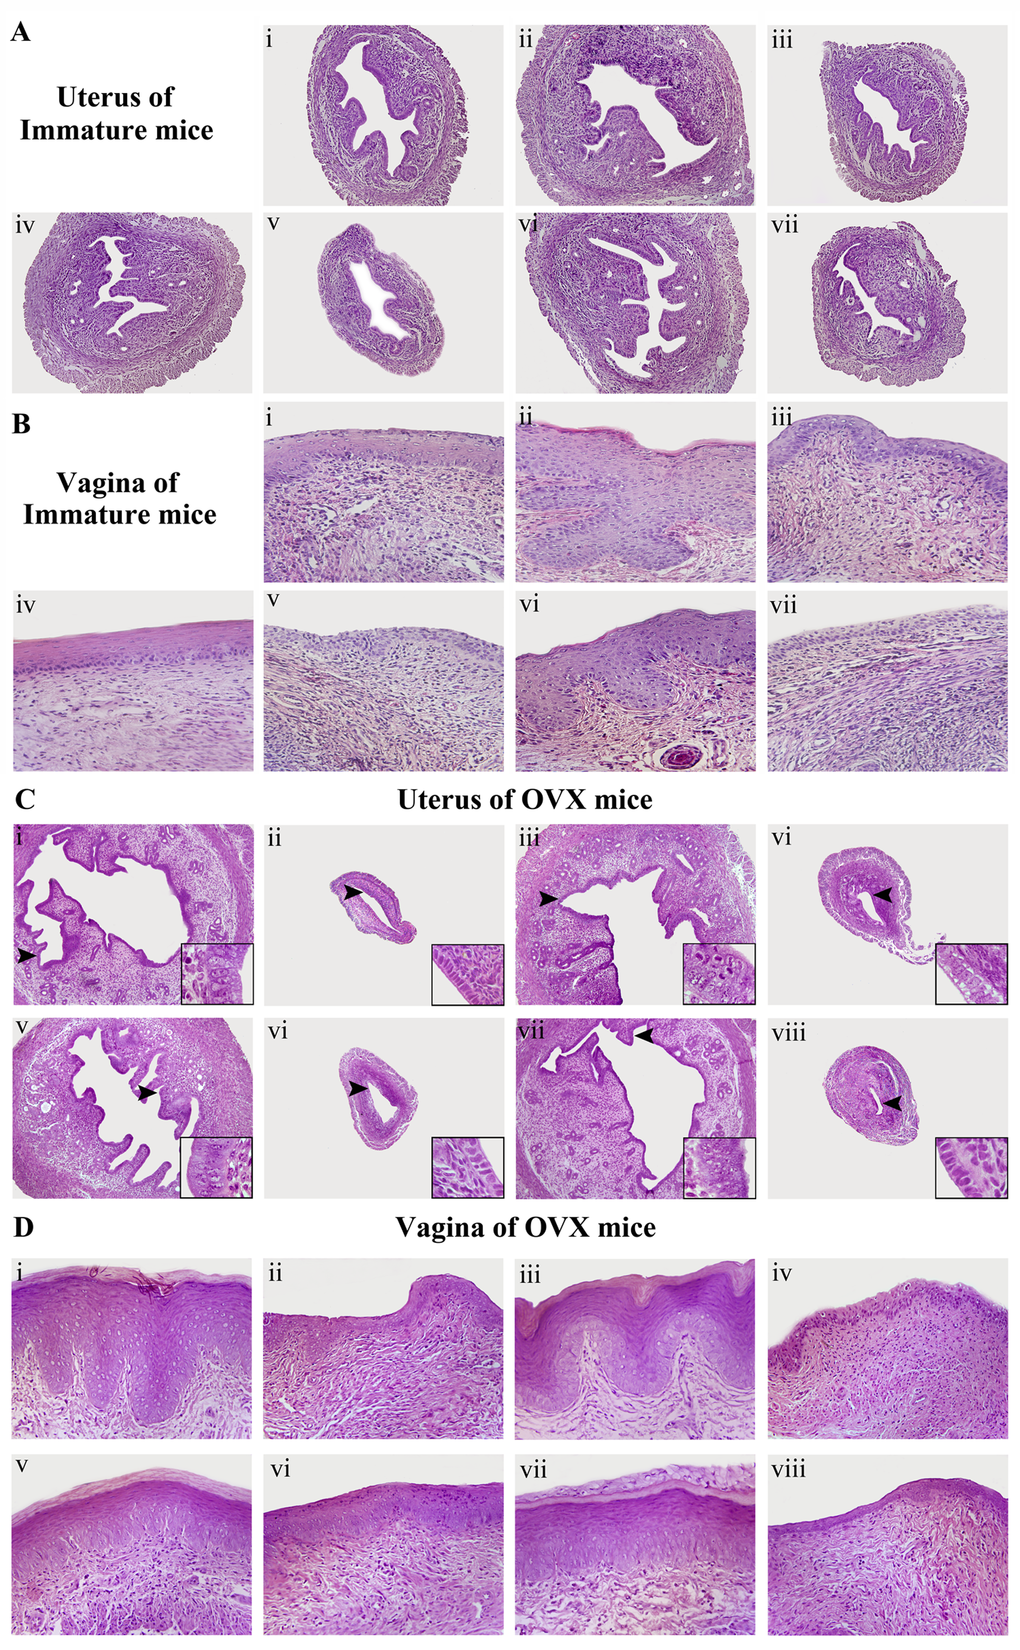 The effects of SM on the histology of the uterus and vagina in immature and ovariectomized (OVX) mice. Representative photomicrographs taken at 200-X magnifiation of uterine in immature mice; 100-X magnifiation of uterine in ovariectomized (OVX) mice and 400-X magnifiation of vaginal sections. (A, B) are the histology of the uterus and vagina in immature mice. (C, D) are the histology of the uterus and vagina in ovariectomized (OVX) mice. The treatment groups in immature mice are shown: (i) control group; (ii) treated with E2; (iii) treated with E2 and ICI; (iv) treated with SM at 1.6 g/kg; (v) treated with SM at 1.6 g/kg and ICI, (vi) treated with SM at 3.2 g/kg; (vii) treated with SM at 3.2 g/kg and ICI. The treatment groups in OVX mice are shown: (i) sham-operated mice; (ii) untreated OVX mice; (iii) treated with E2; (iv) treated with E2 and ICI, (v) treated with SM at 1.6 g/kg; (vi) treated with SM at 1.6 g/kg and ICI; (vii) treated with SM at 3.2 g/kg; (viii) treated with SM at 3.2 g/kg and ICI.